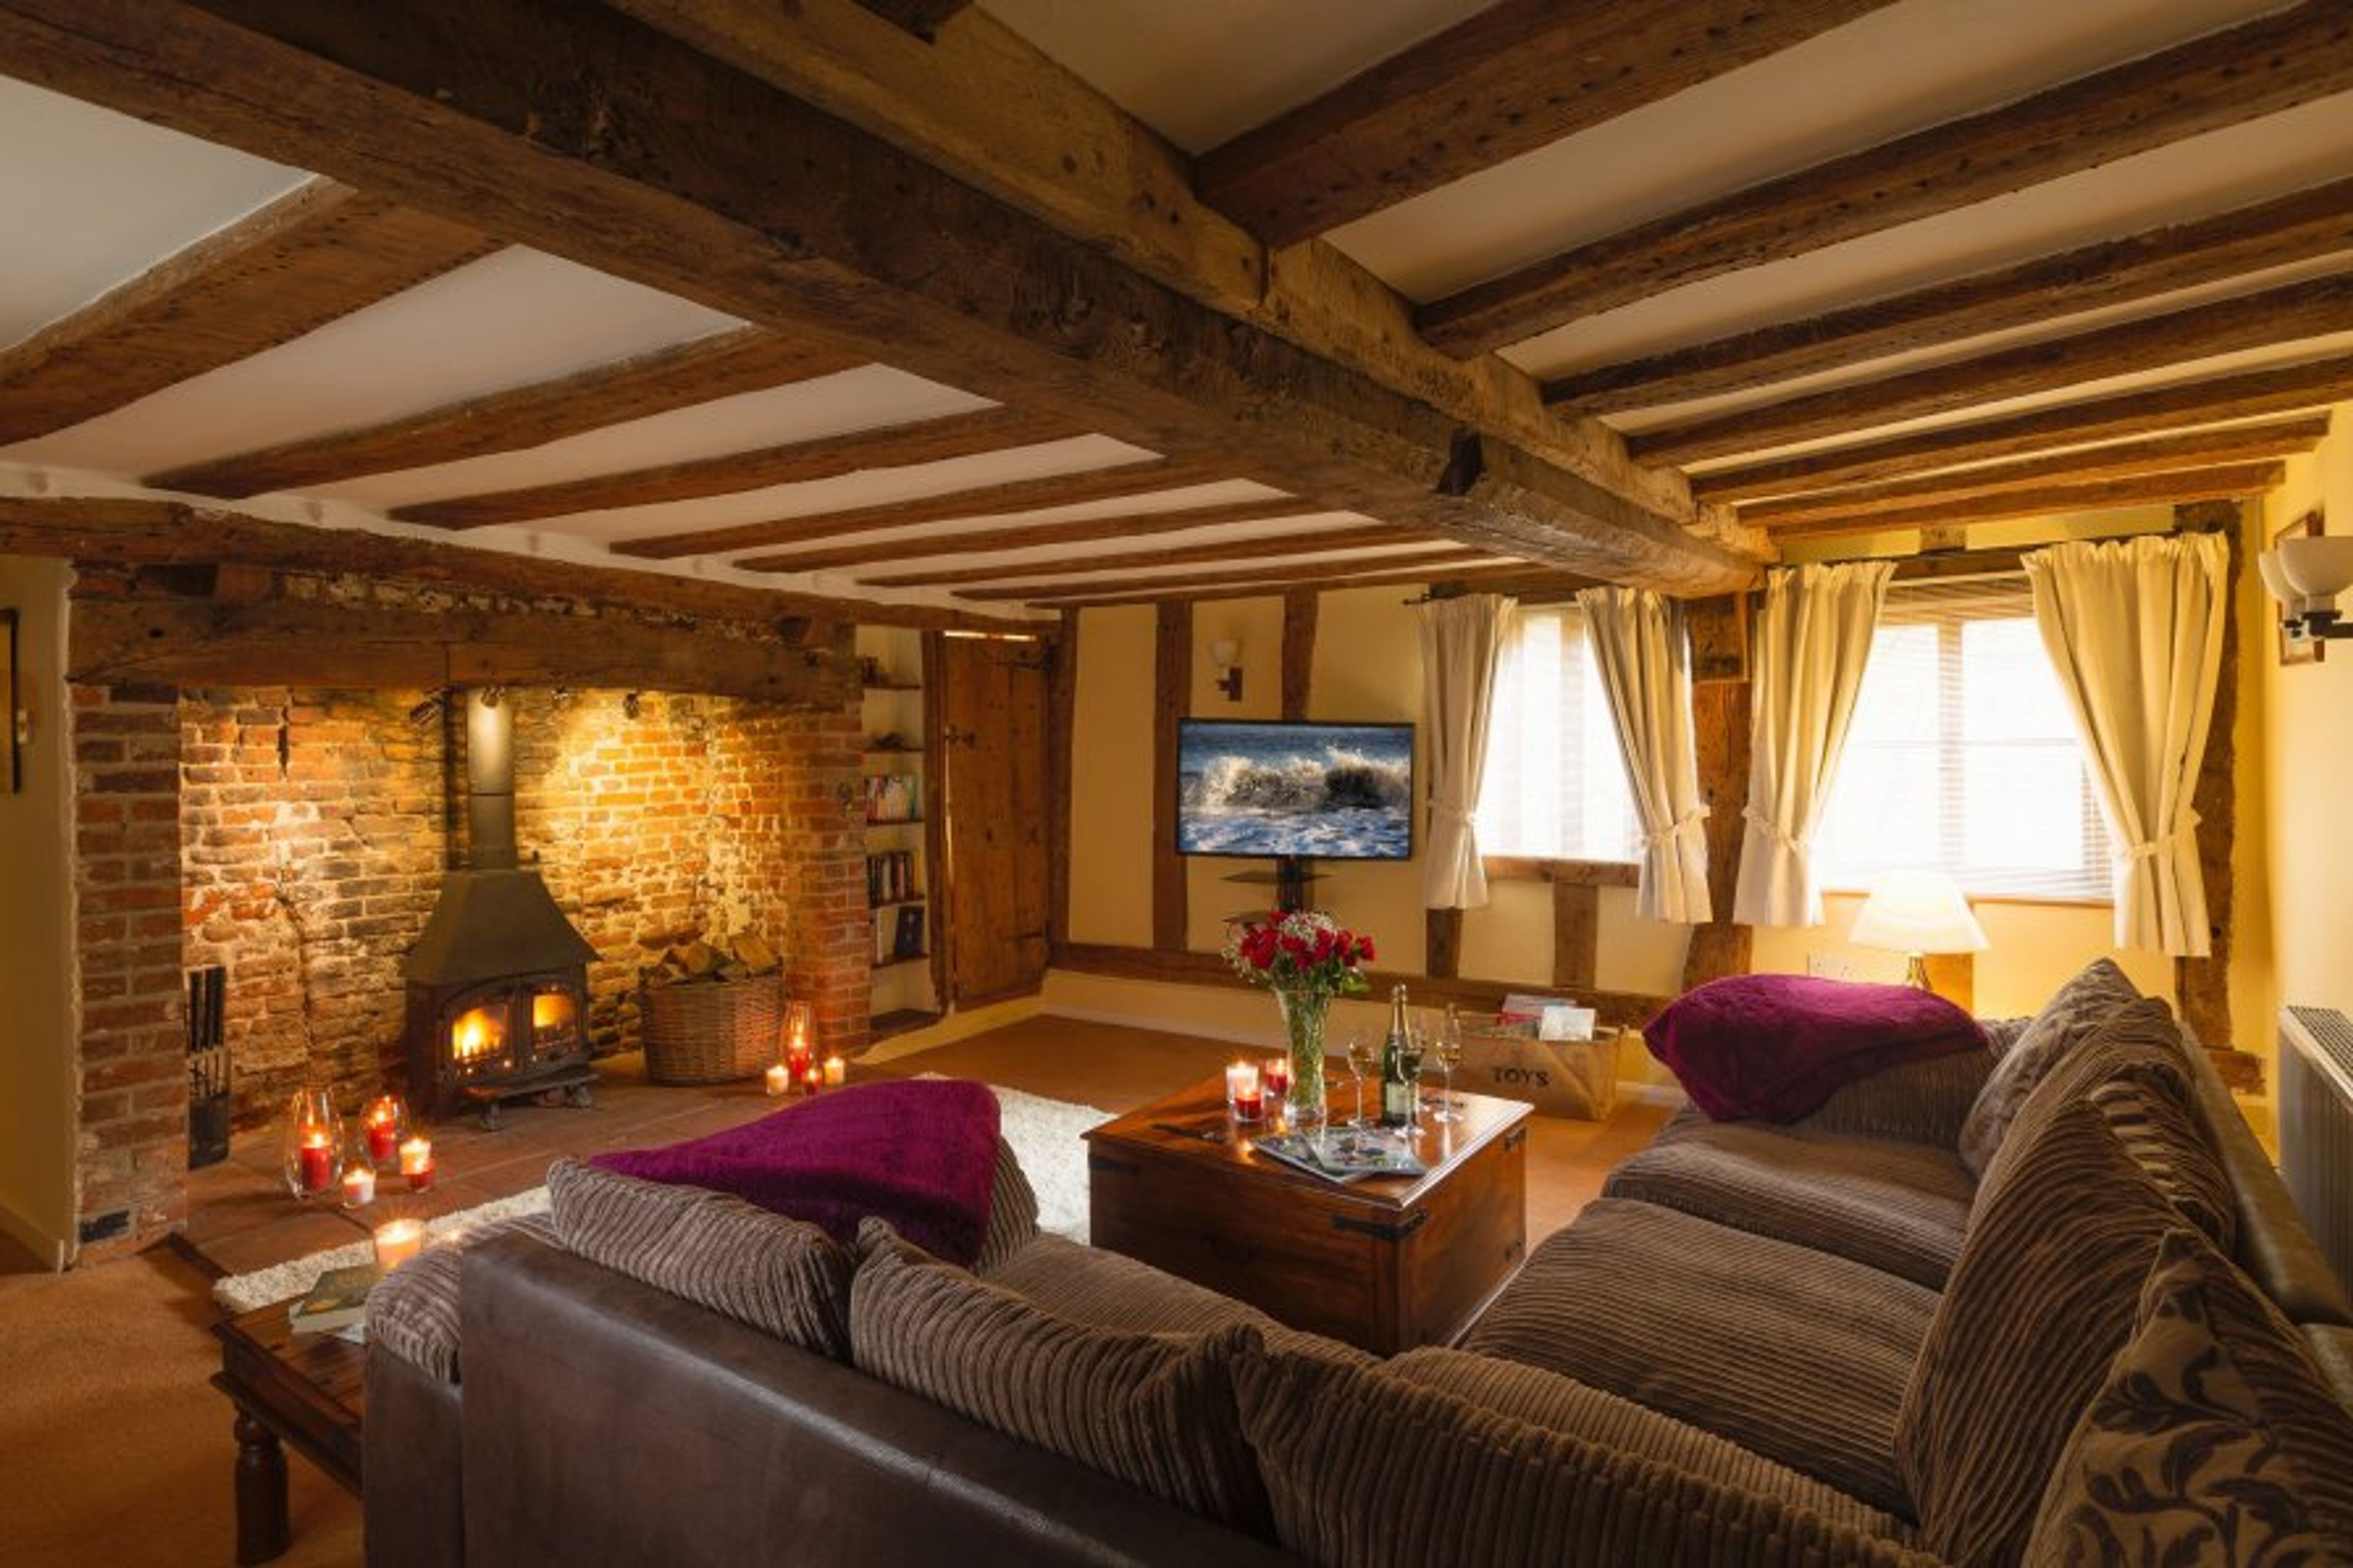 Lounge with large inglenook fireplace and exposed beams.